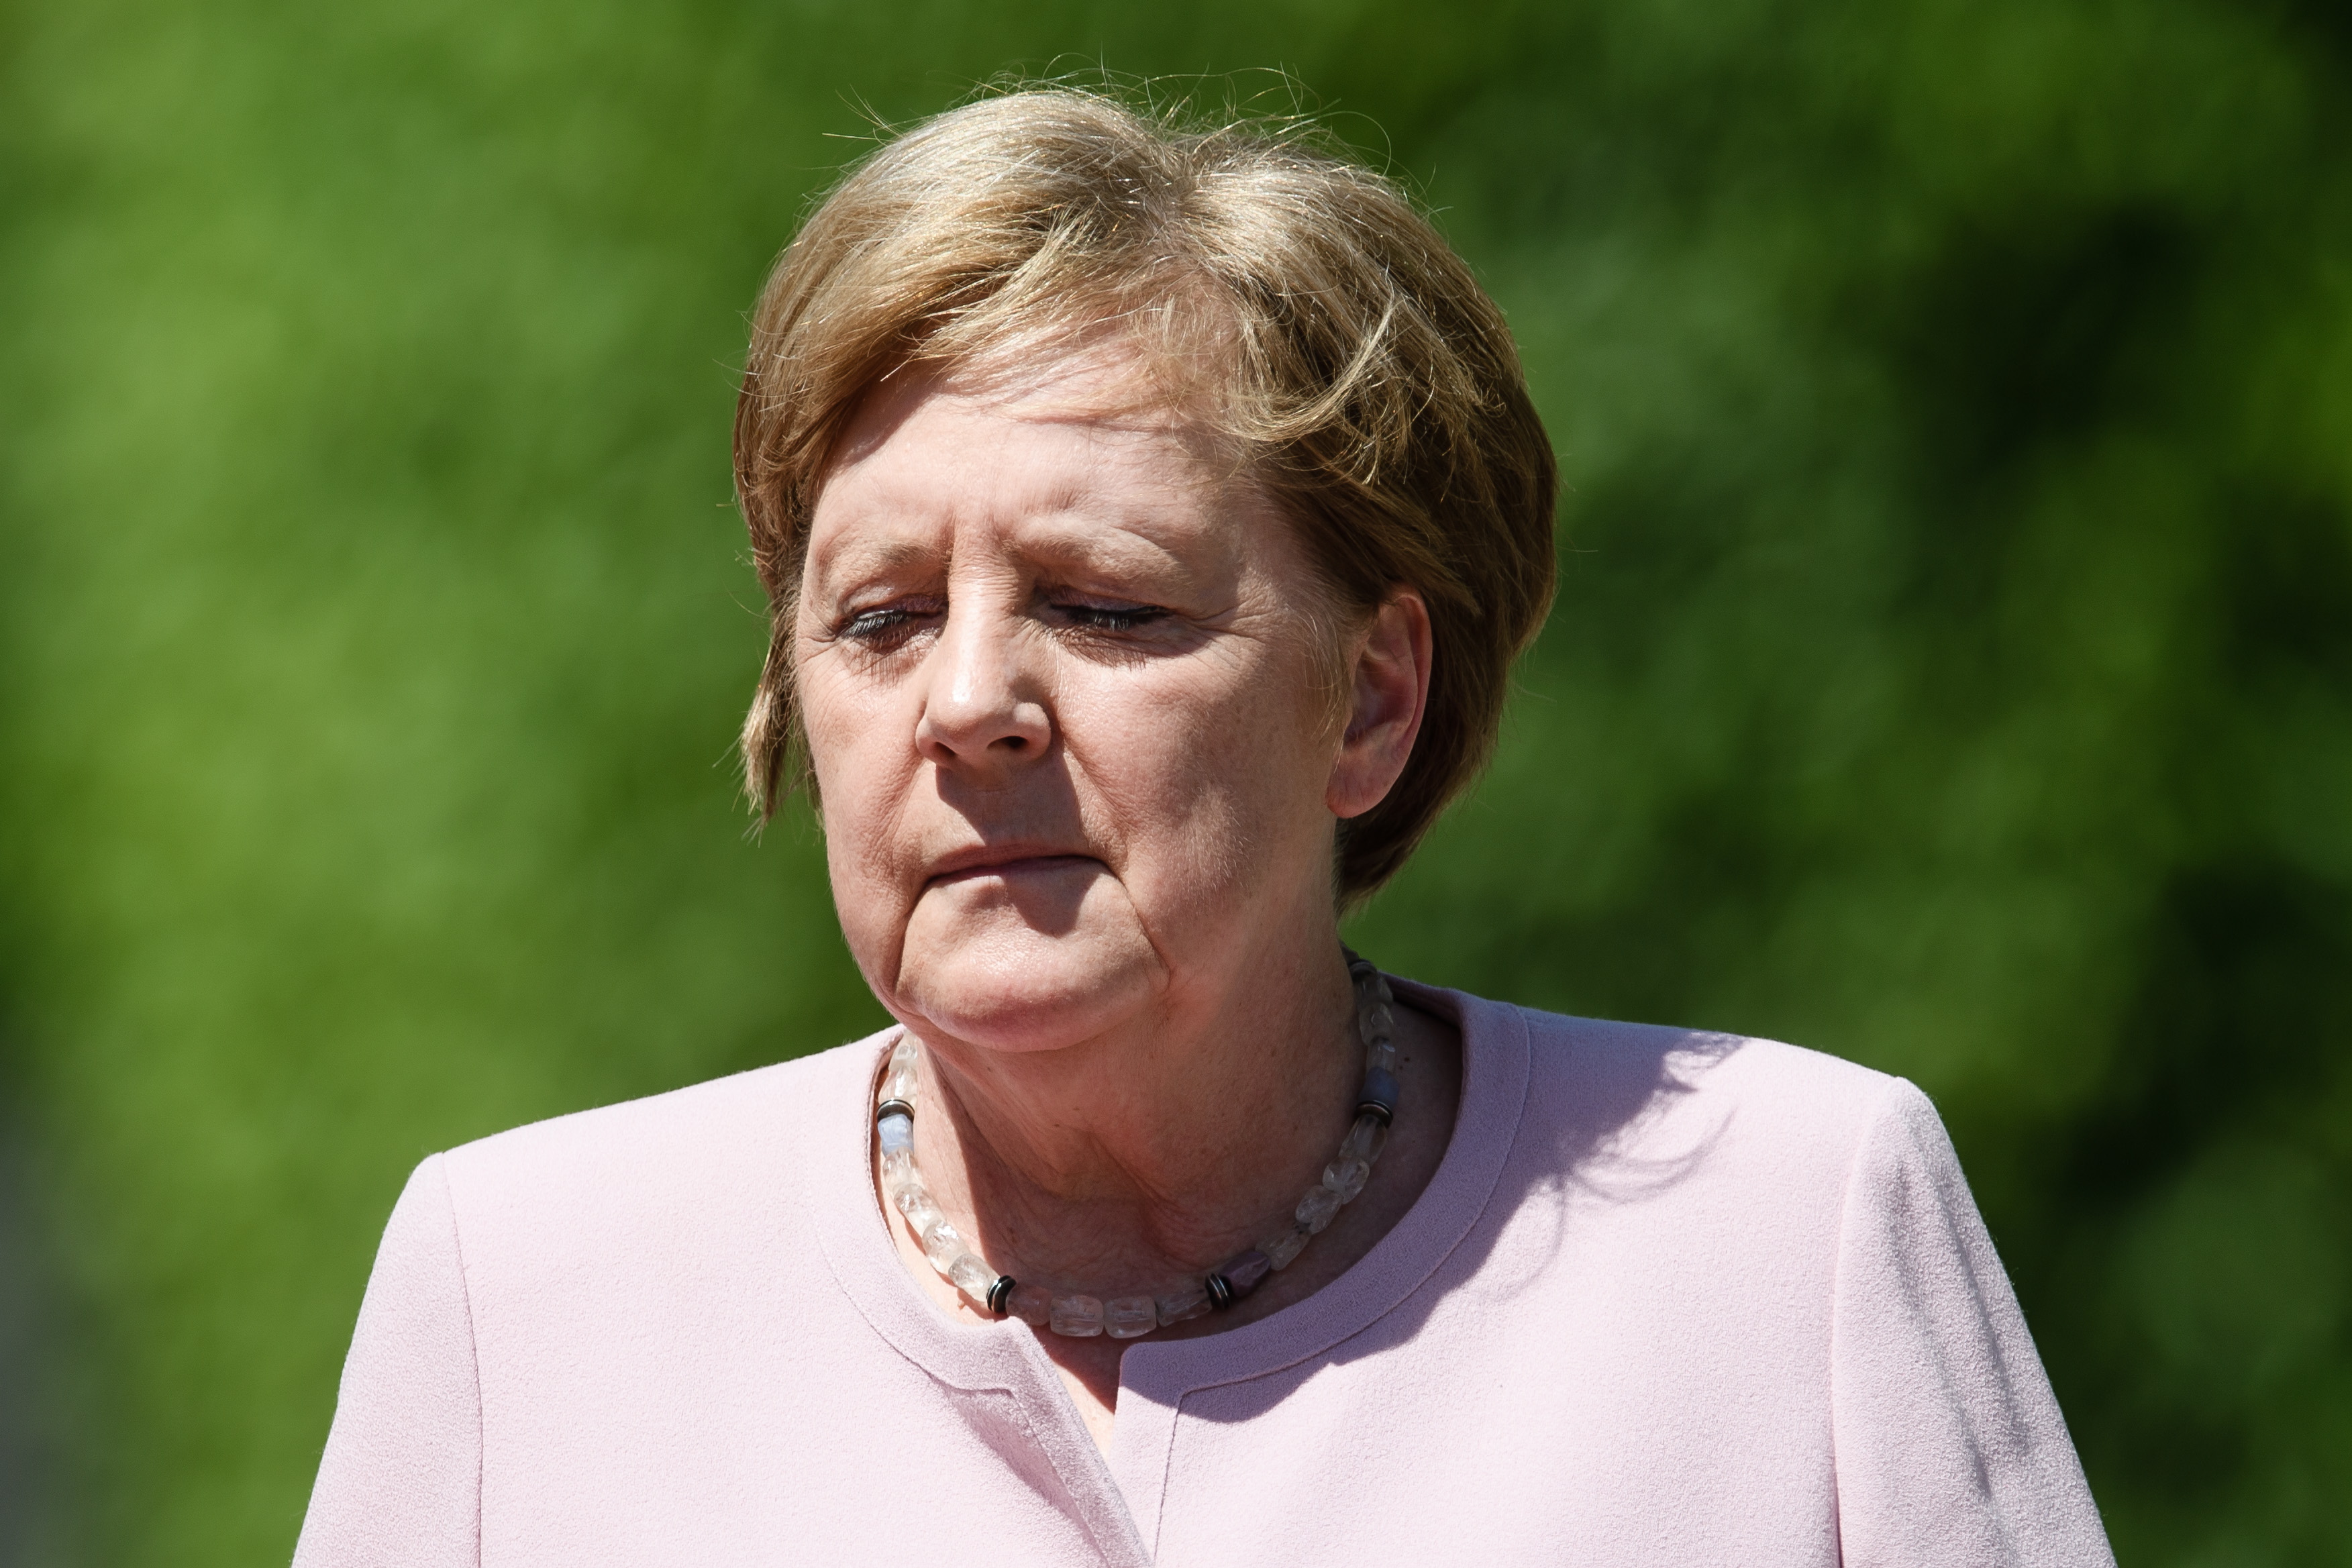 epa07677008 (FILE) - German Chancellor Angela Merkel during a reception with military honors for visiting Ukraine's President Zelensky at the Chancellery in Berlin, Germany, 18 June 2019 (reissued 27 June 2019). German Chancellor Merkel, during an official event for the handing over of certificates of appointment and discharge to Ministers of Justice at Bellevue Palace in Berlin on 27 June 2019, was seen trembling, once again, eight days after a similar incident that occurred on 18 June 2019, during Ukraine's President Zelensky's visit to the country, media reported. The first episode was attributed to heat and dehydration as she said had forgotten to drink enough water. Germany as well as other European countries is affected by a heat wave with temperatures soaring above 30 degrees Celsius.  EPA/CLEMENS BILAN